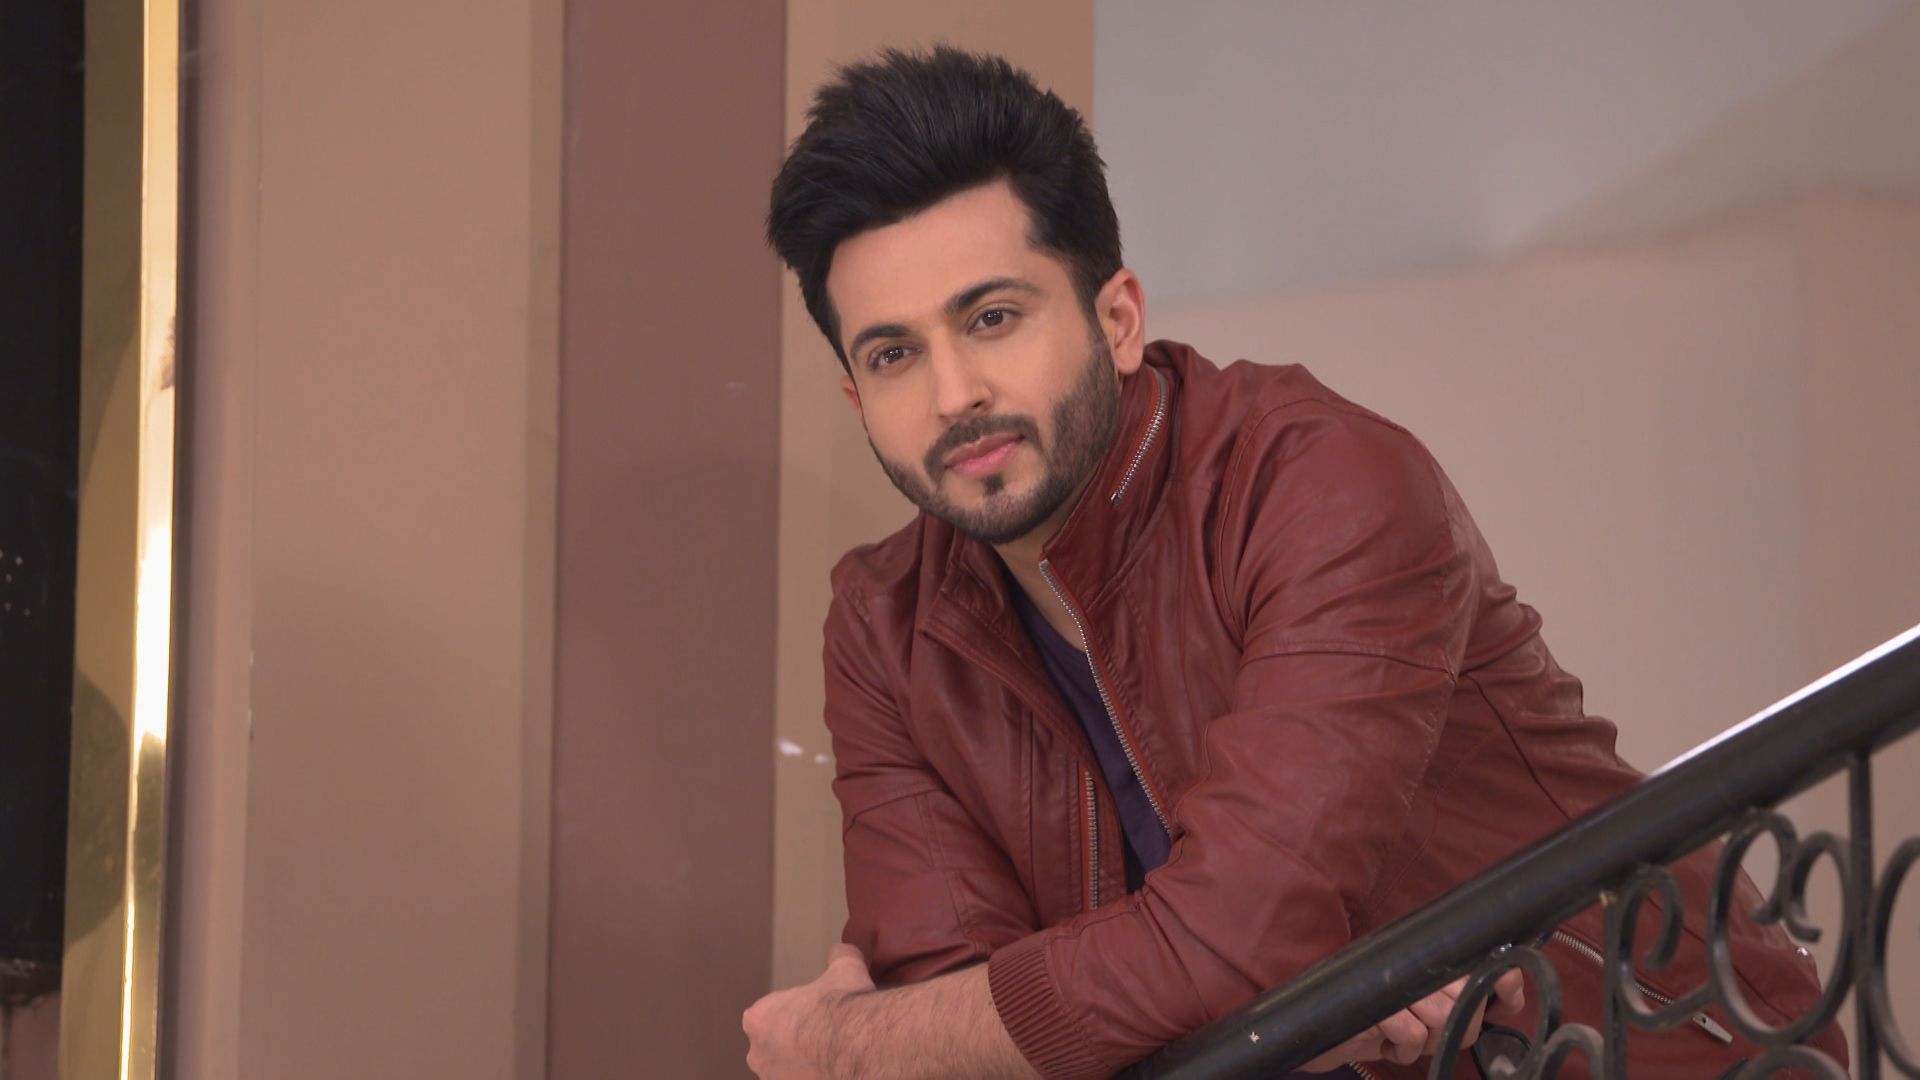 Kundali Bhagya's Dheeraj Dhoopar bags the Most Charismatic Performer Of The  Year Award - Bollywood News & Gossip, Movie Reviews, Trailers & Videos at  Bollywoodlife.com